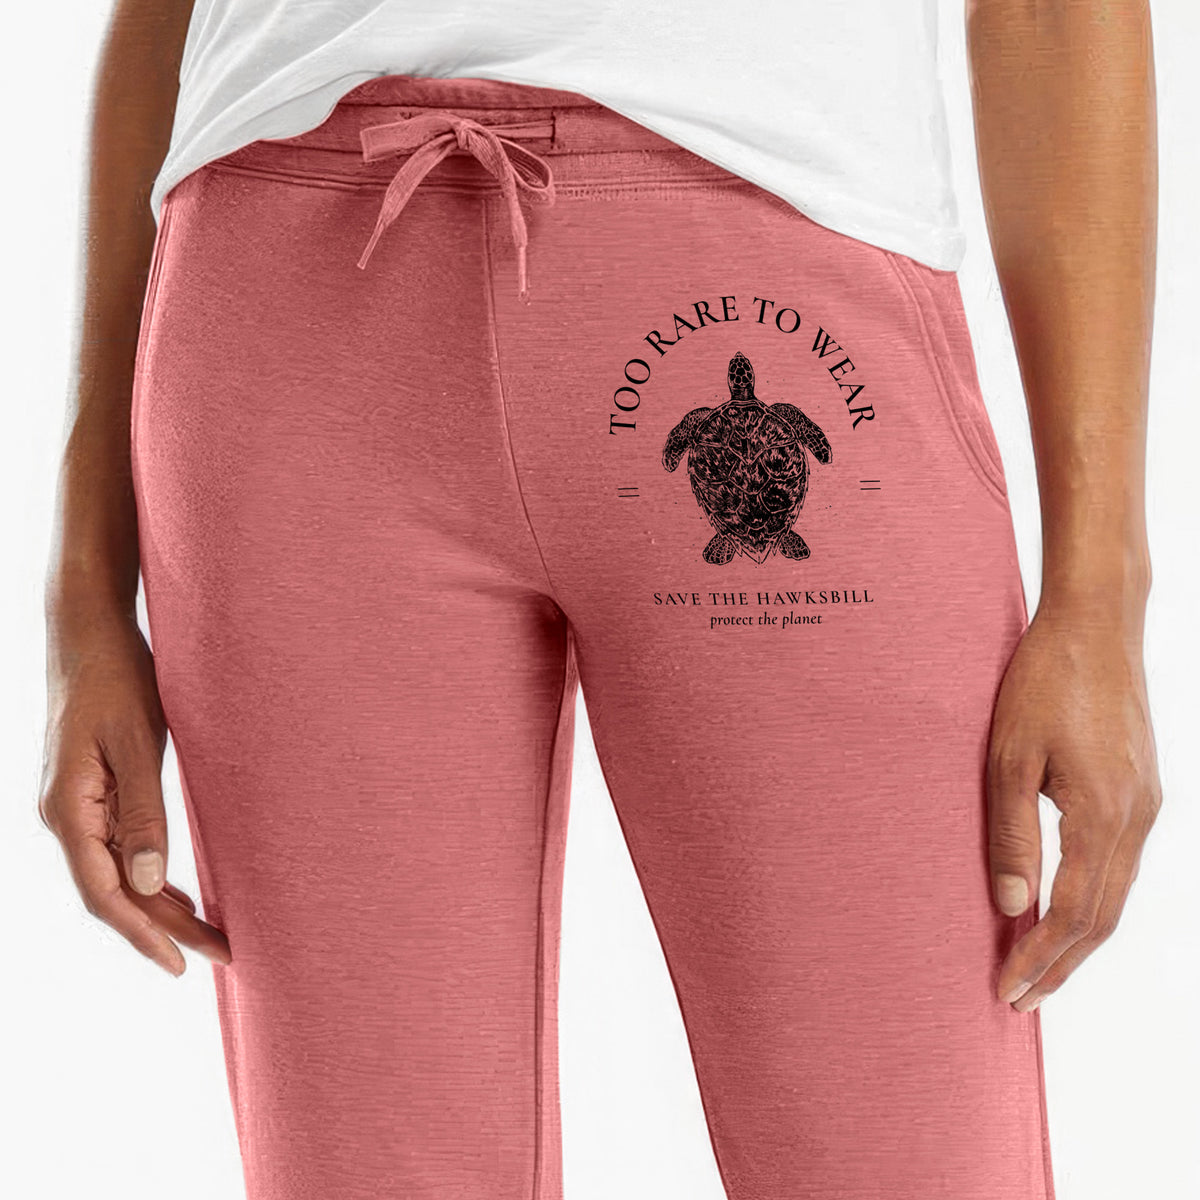 Too Rare to Wear - Save the Hawksbill - Women&#39;s Cali Wave Jogger Sweatpants